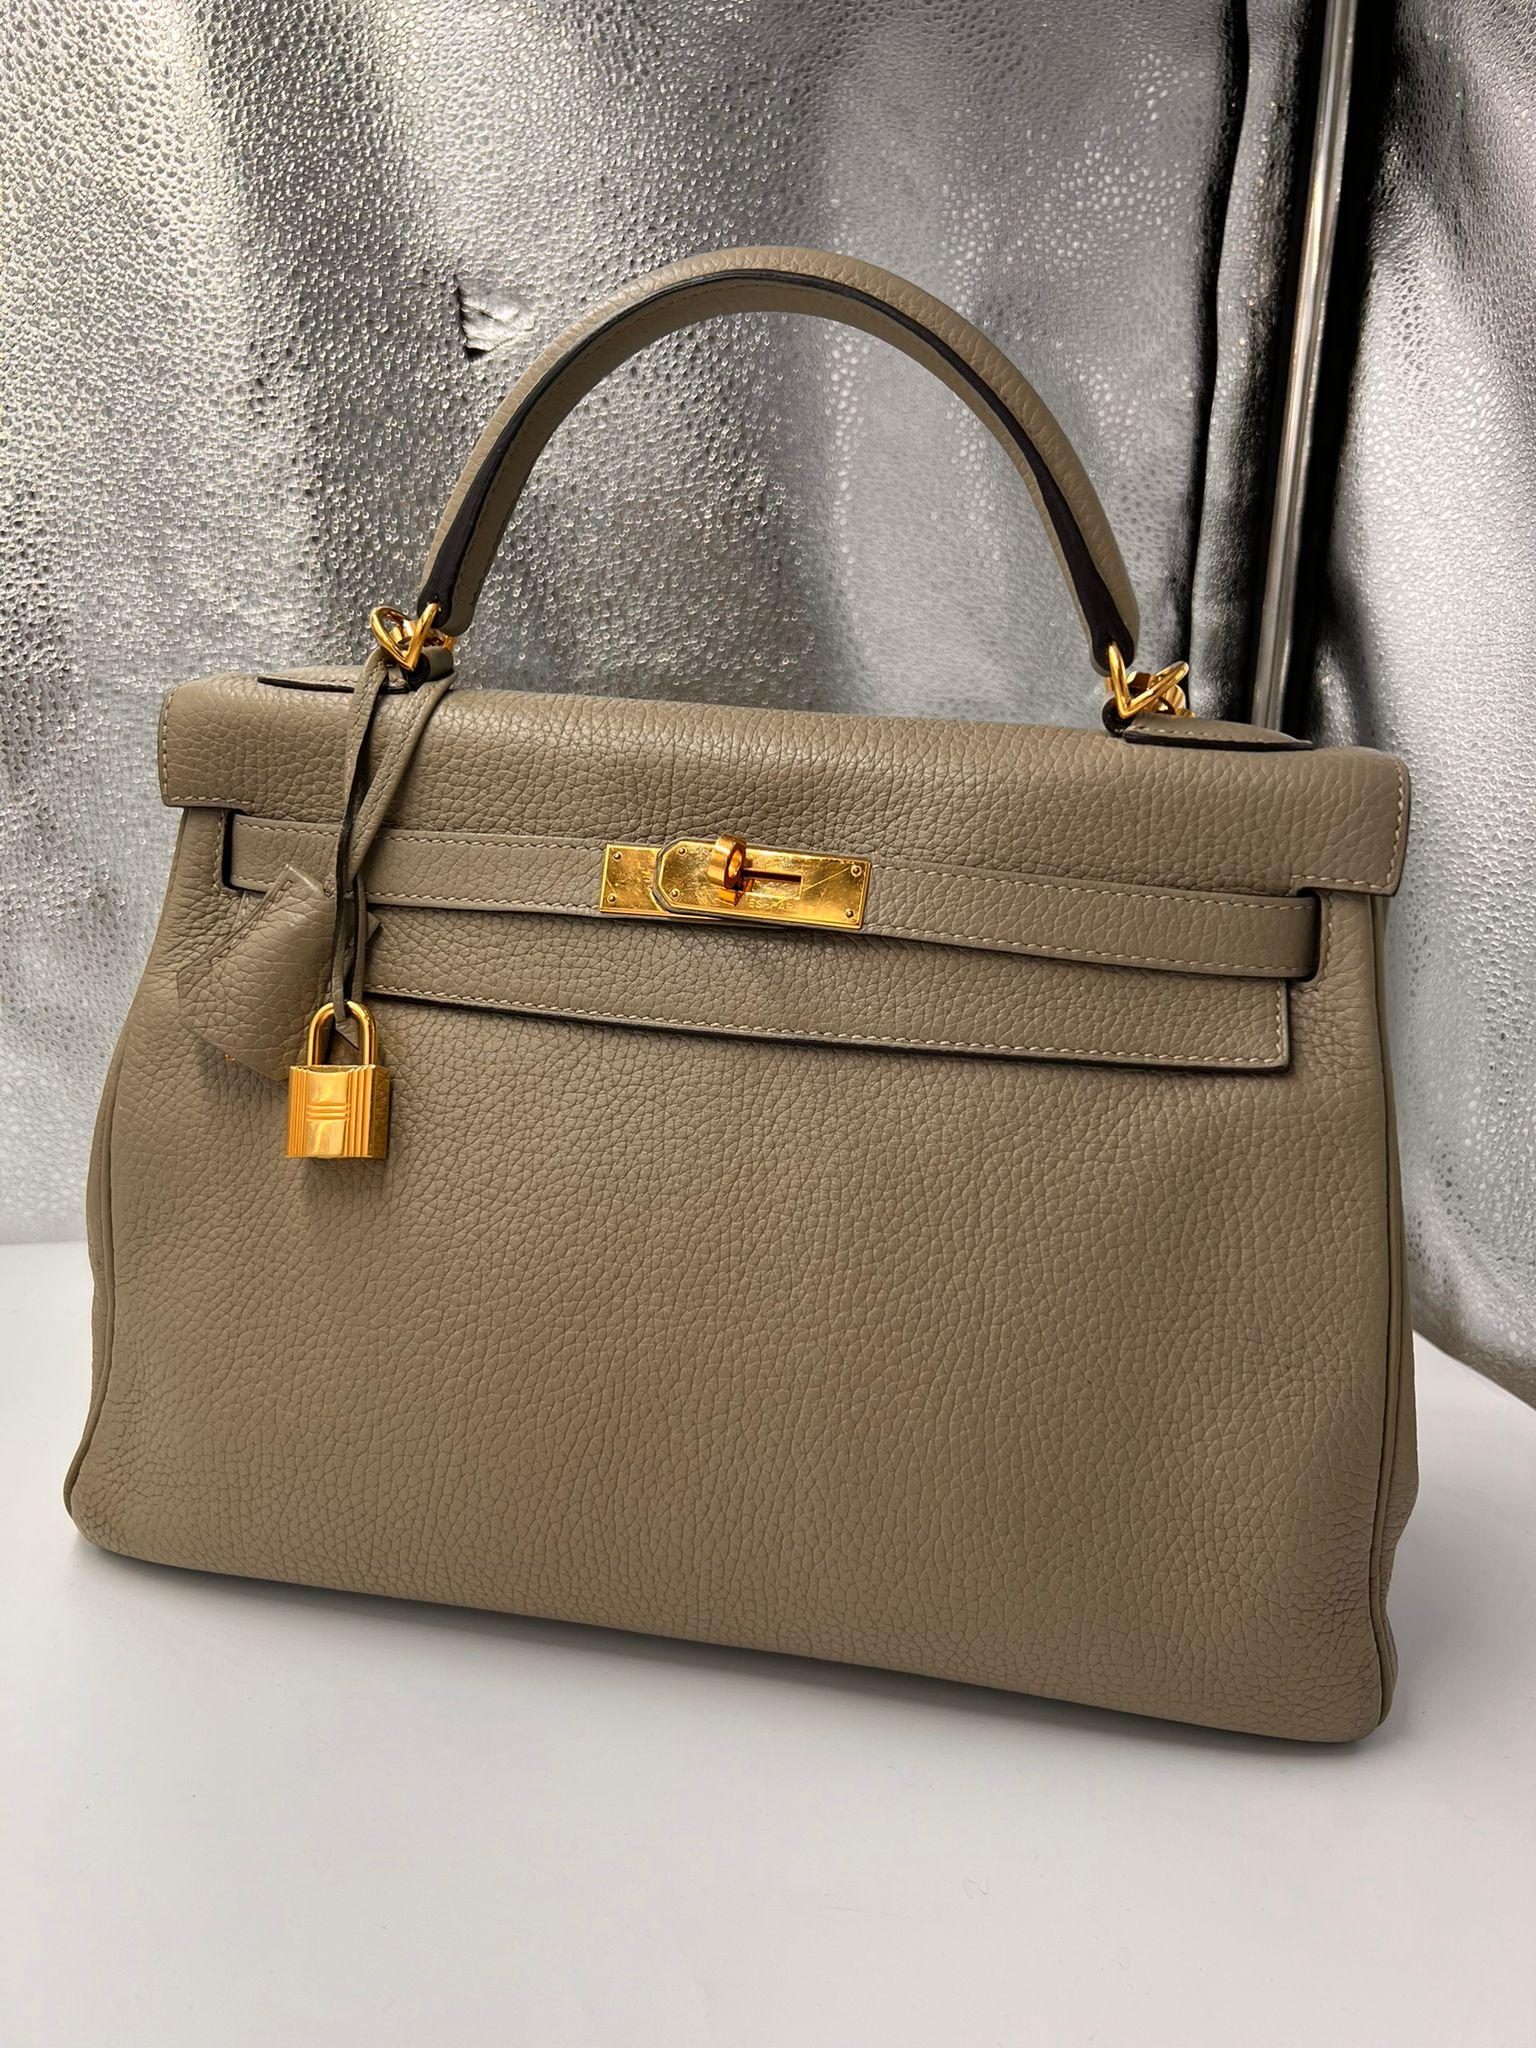 Hermès: a Sauge Clemence Leather Retourne Kelly 32
2016
Gold hardware

32cm wide, 24cm high, 10cm handle drop, 43cm shoulder drop, includes padlock, keys, cloche and shoulder strap. Signs of leather aging and wear, please refer to the detailed